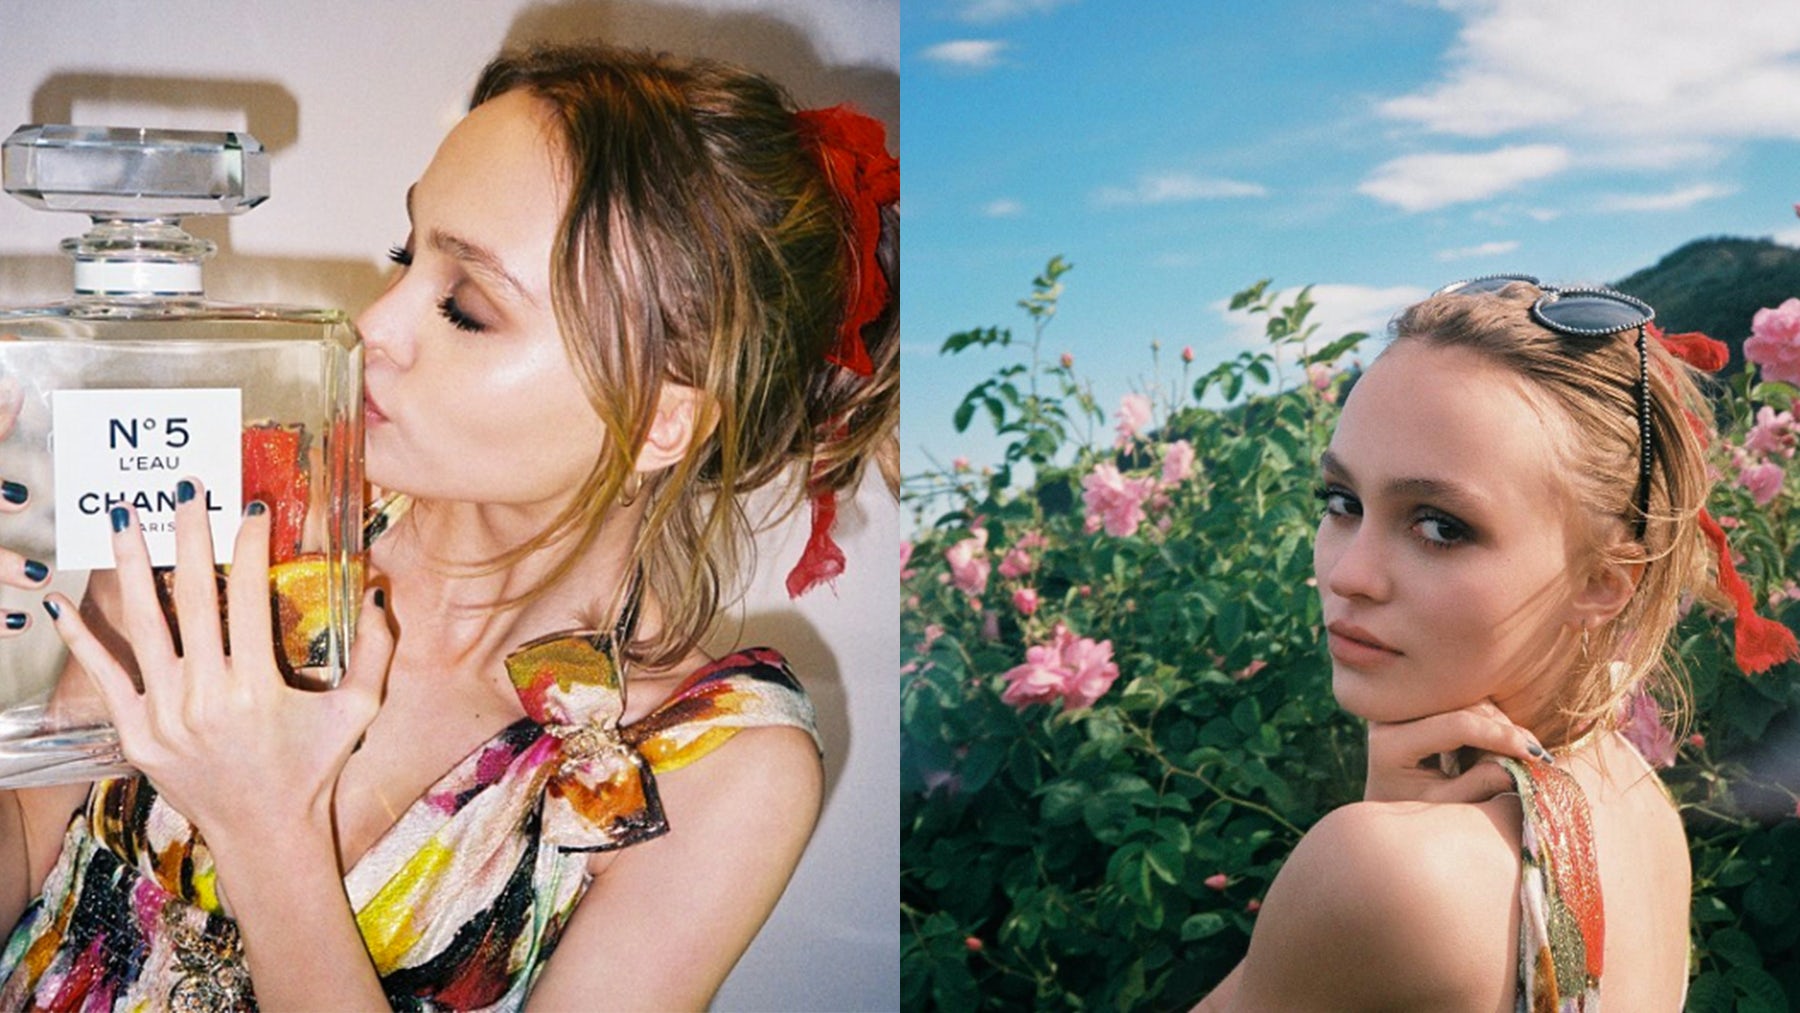 Chanel names Lily Rose Depp new face of No 5 L'Eau - Global Cosmetics News